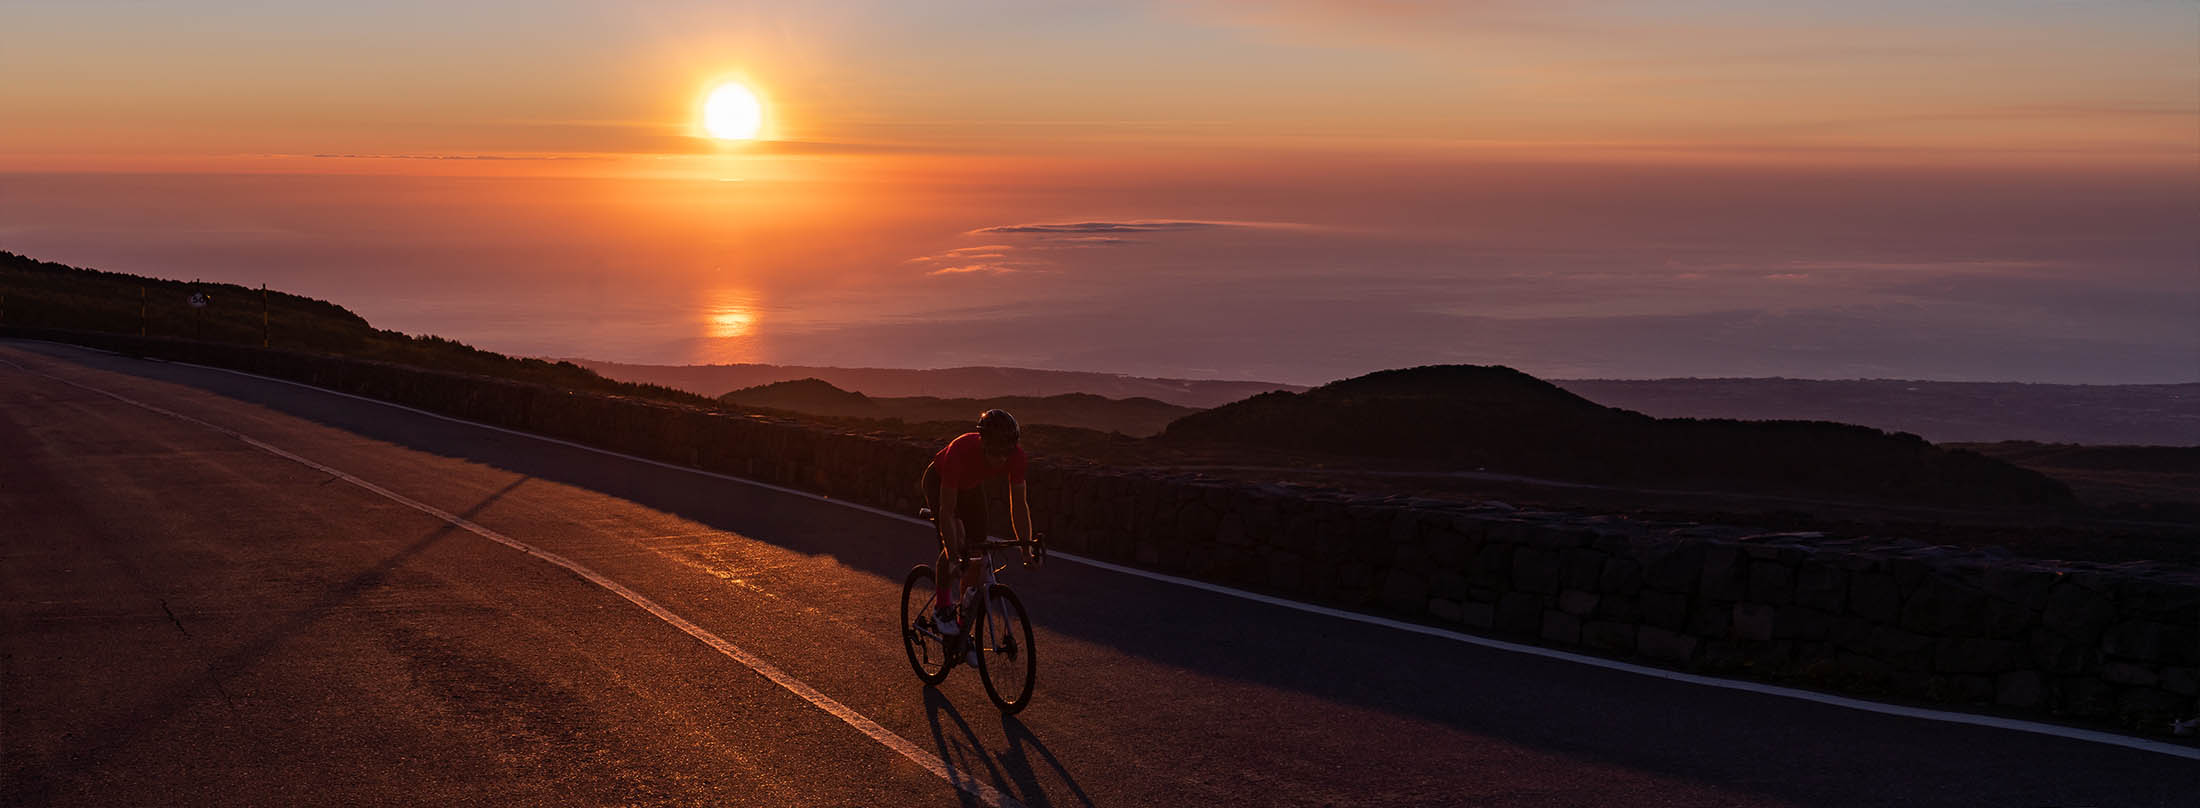 setting sun on Sicily (Etna) and Luxa cyclist on the road